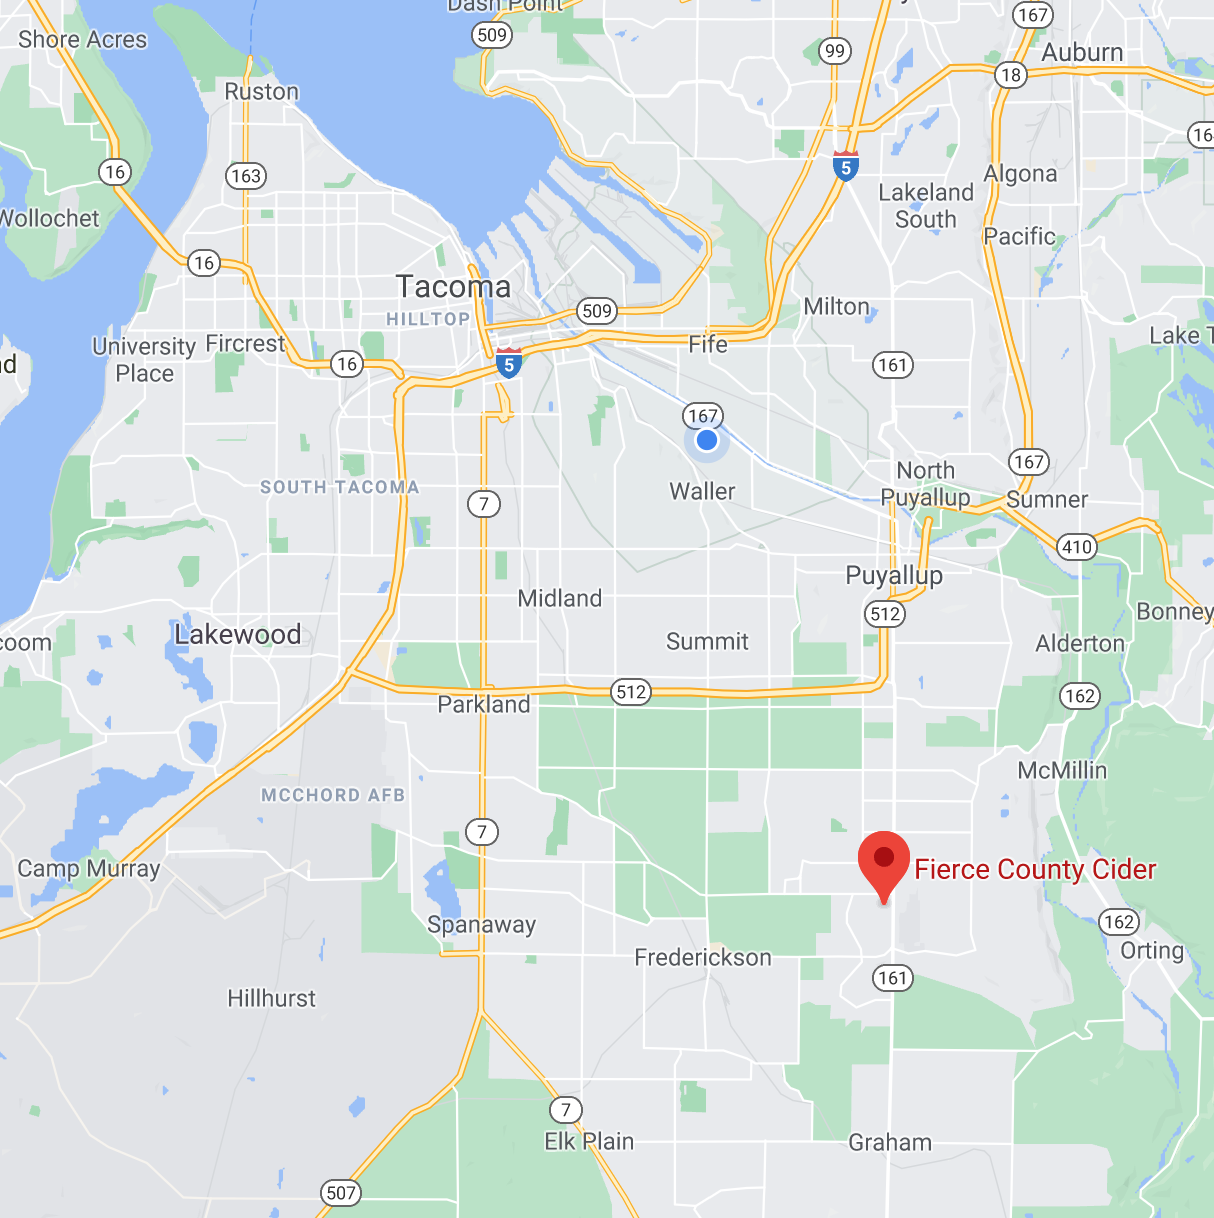 Find us in Puyallup's South Hill!